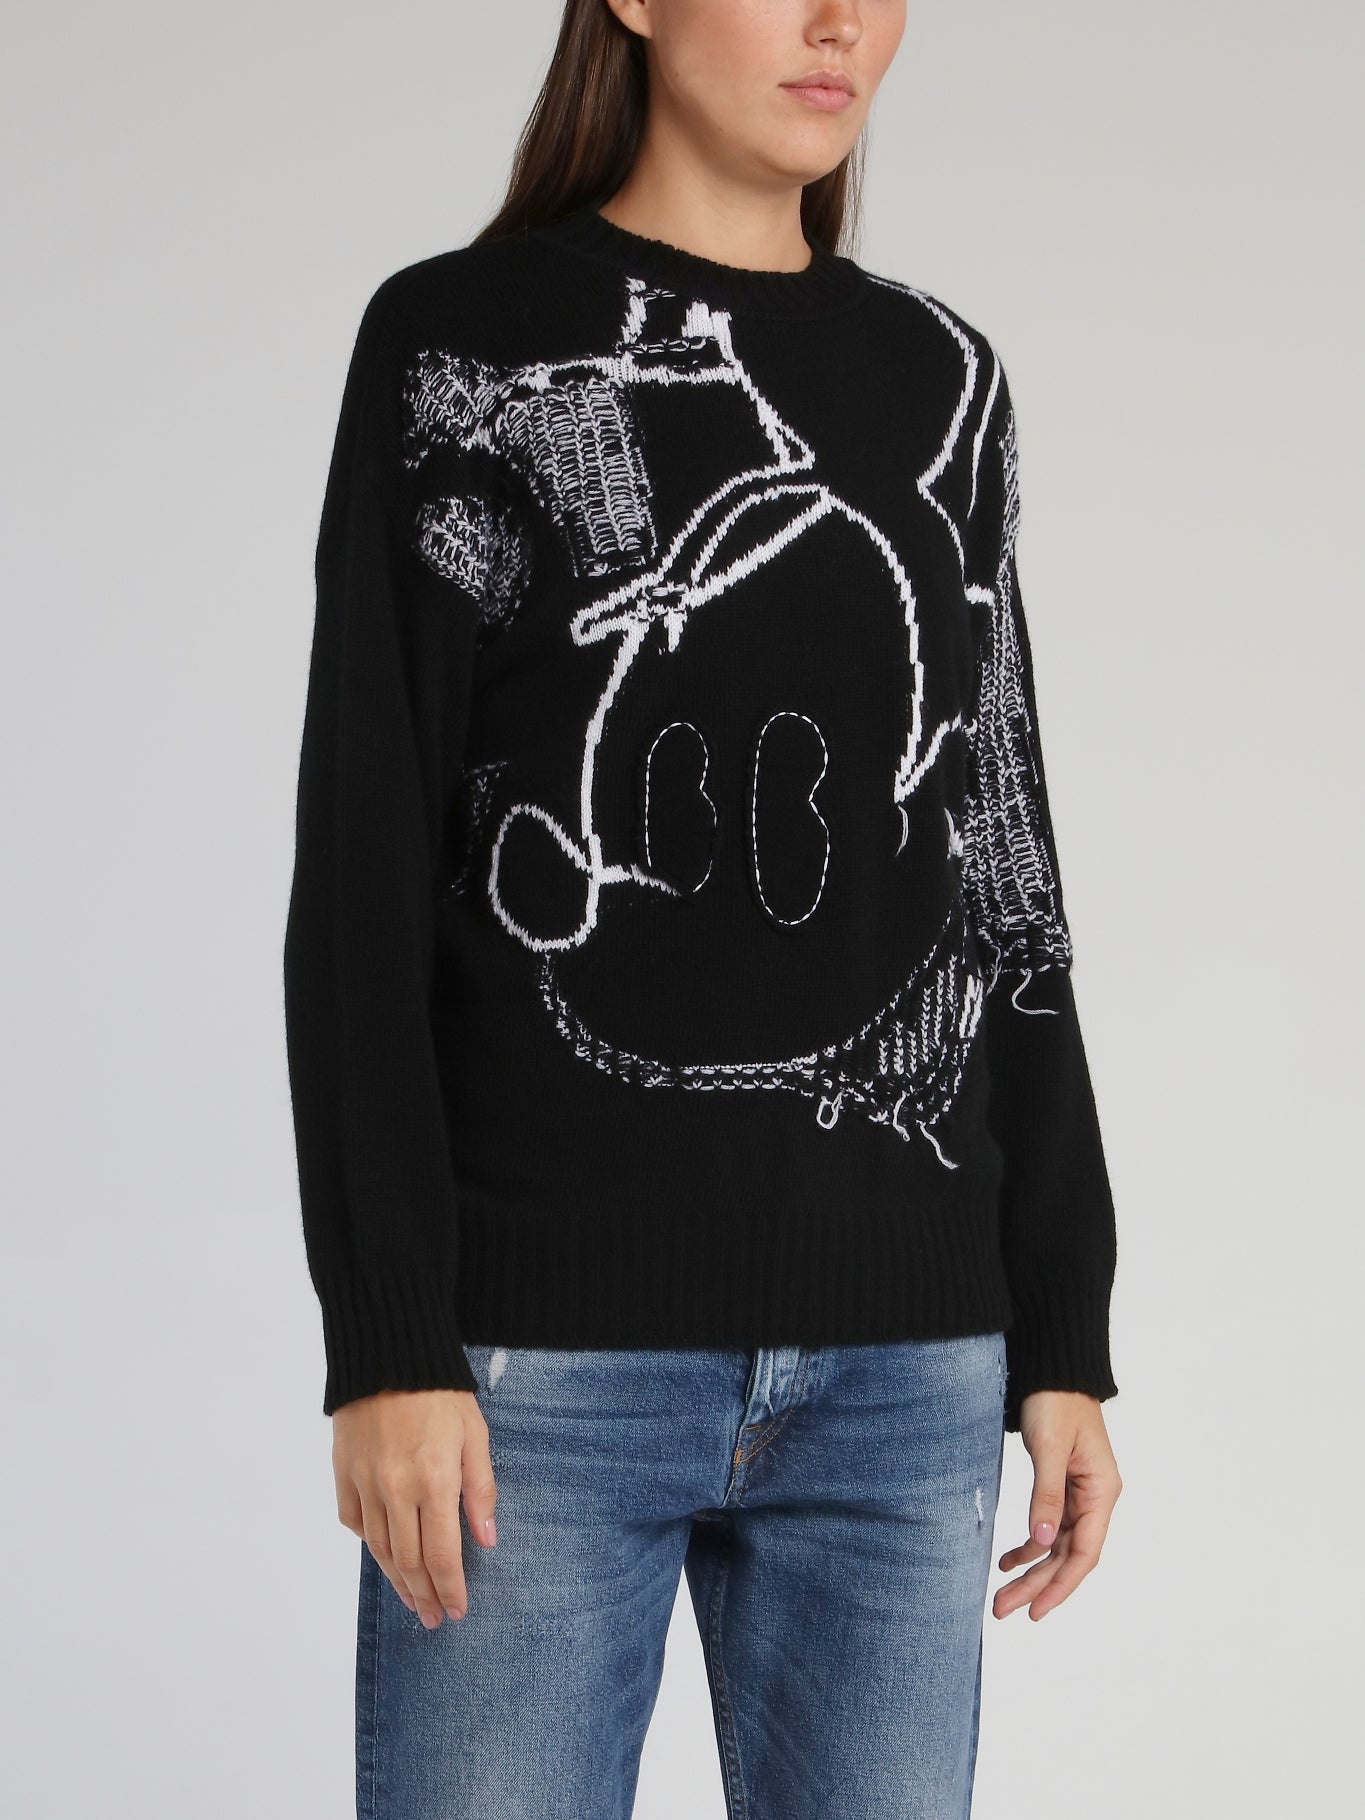 Mickey Mouse Black Contrast Sweater